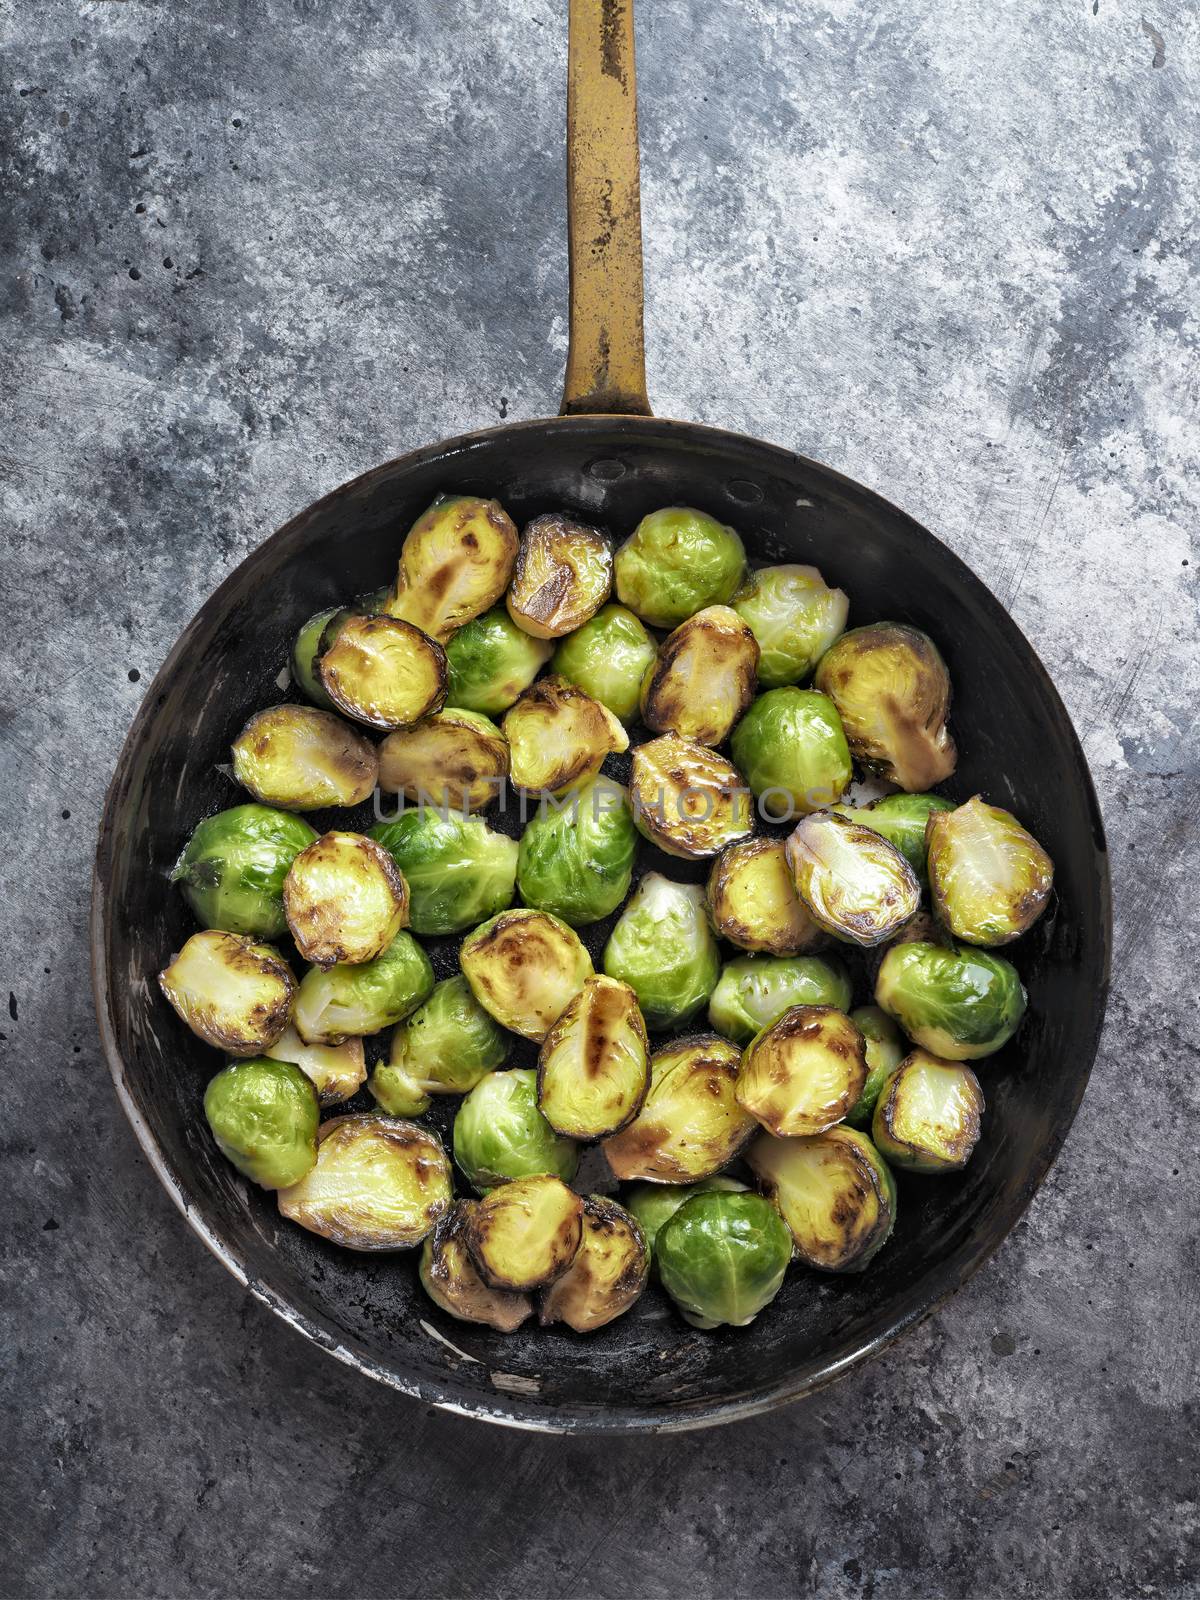 rustic crispy fried brussels sprouts by zkruger